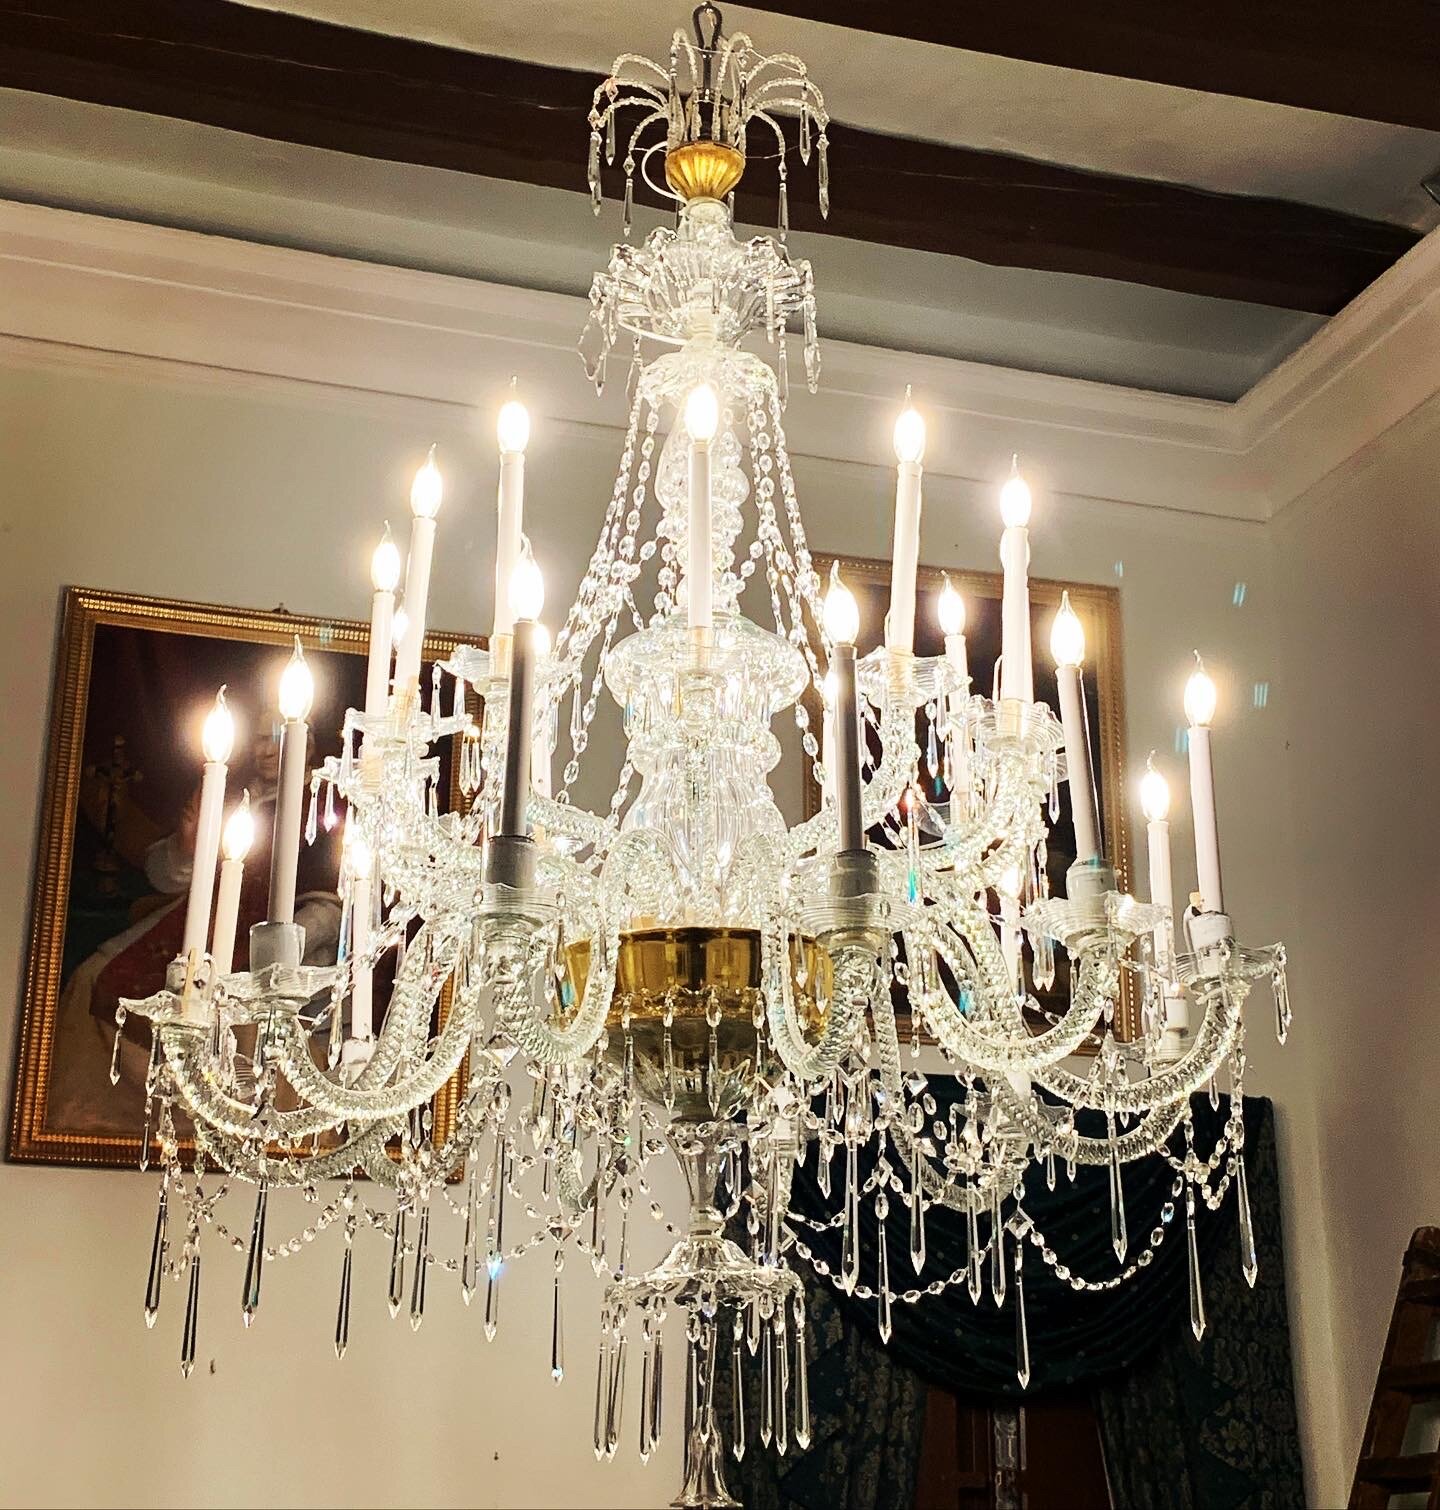 View of the restored illuminated chandelier